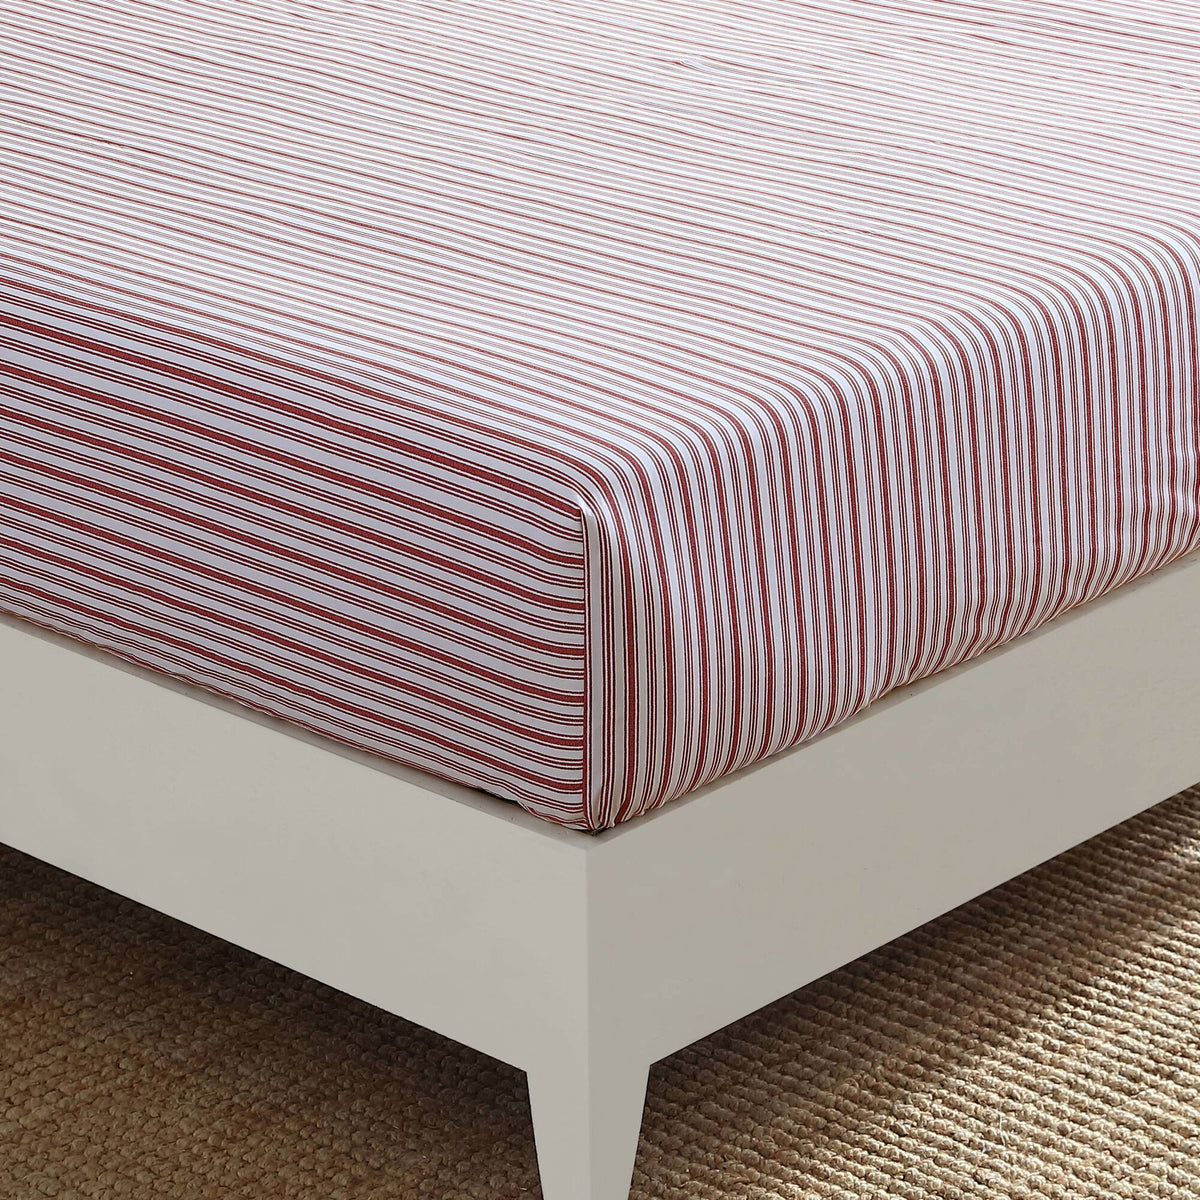 Nautica Coleridge Striped Red King Fitted Sheet Pale Orchid